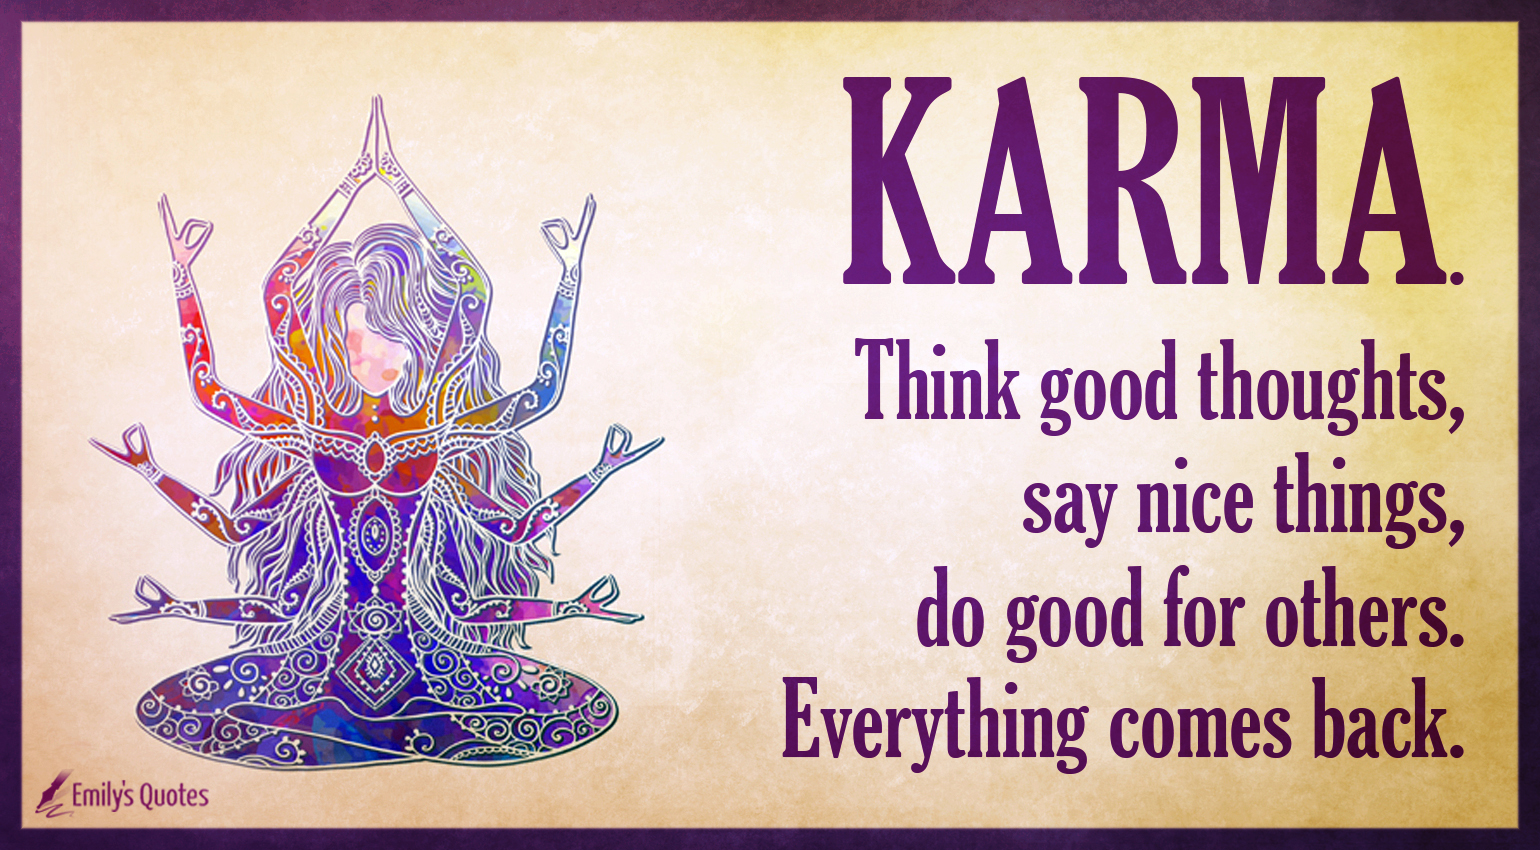 Karma. Think good thoughts, say nice things, do good for others